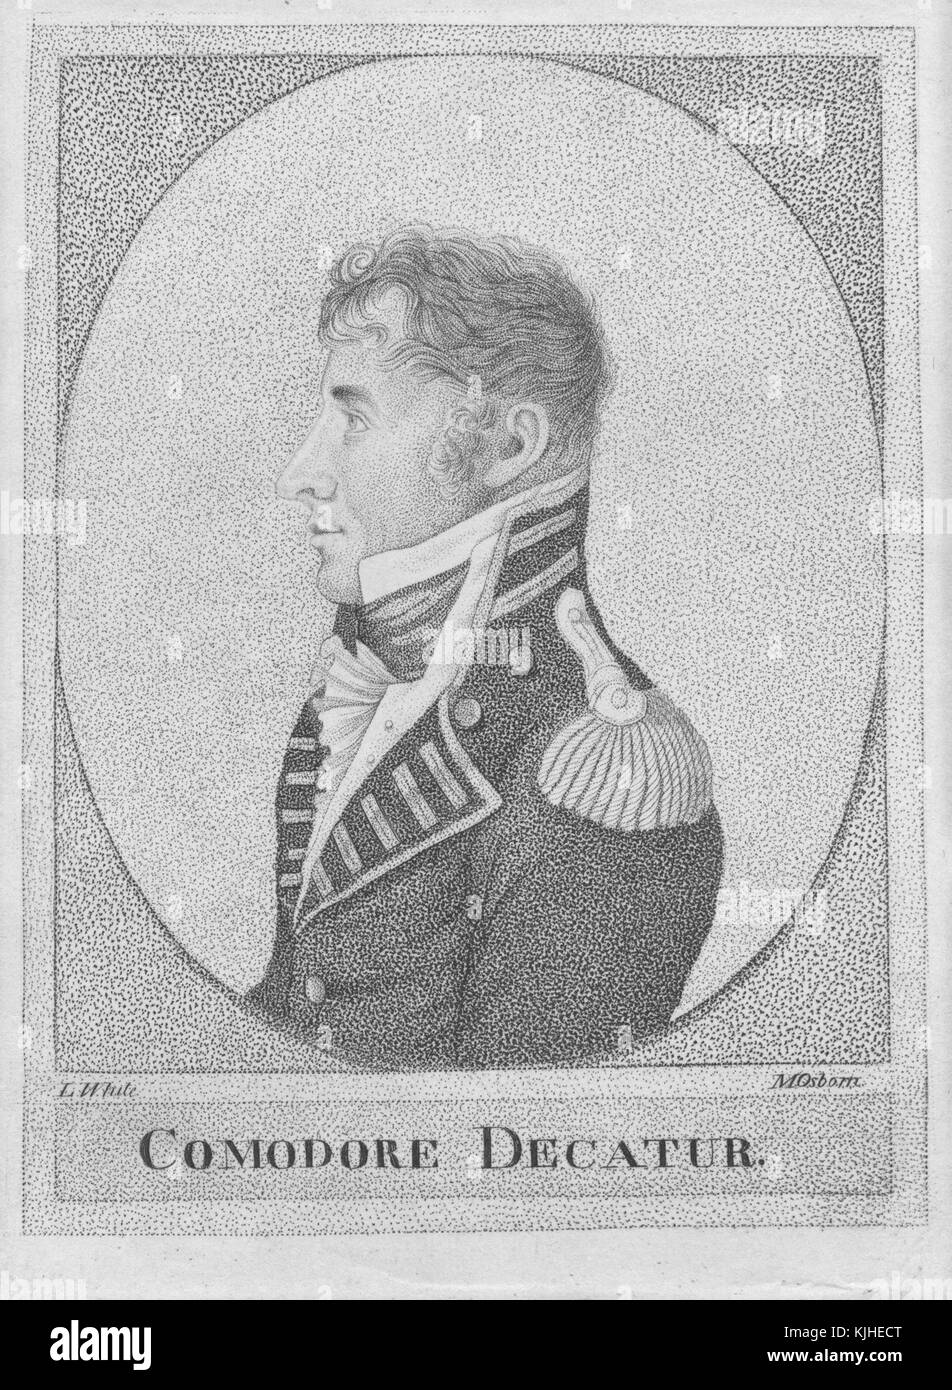 Engraved portrait of Stephen Decatur, Junior, a United States naval officer and commodore notable for his many naval victories in the early 19th century, his service in the Navy took him through both Barbary Wars in North Africa, the Quasi War with France, and the War of 1812 with Britain, France, 1800. From the New York Public Library. Stock Photo